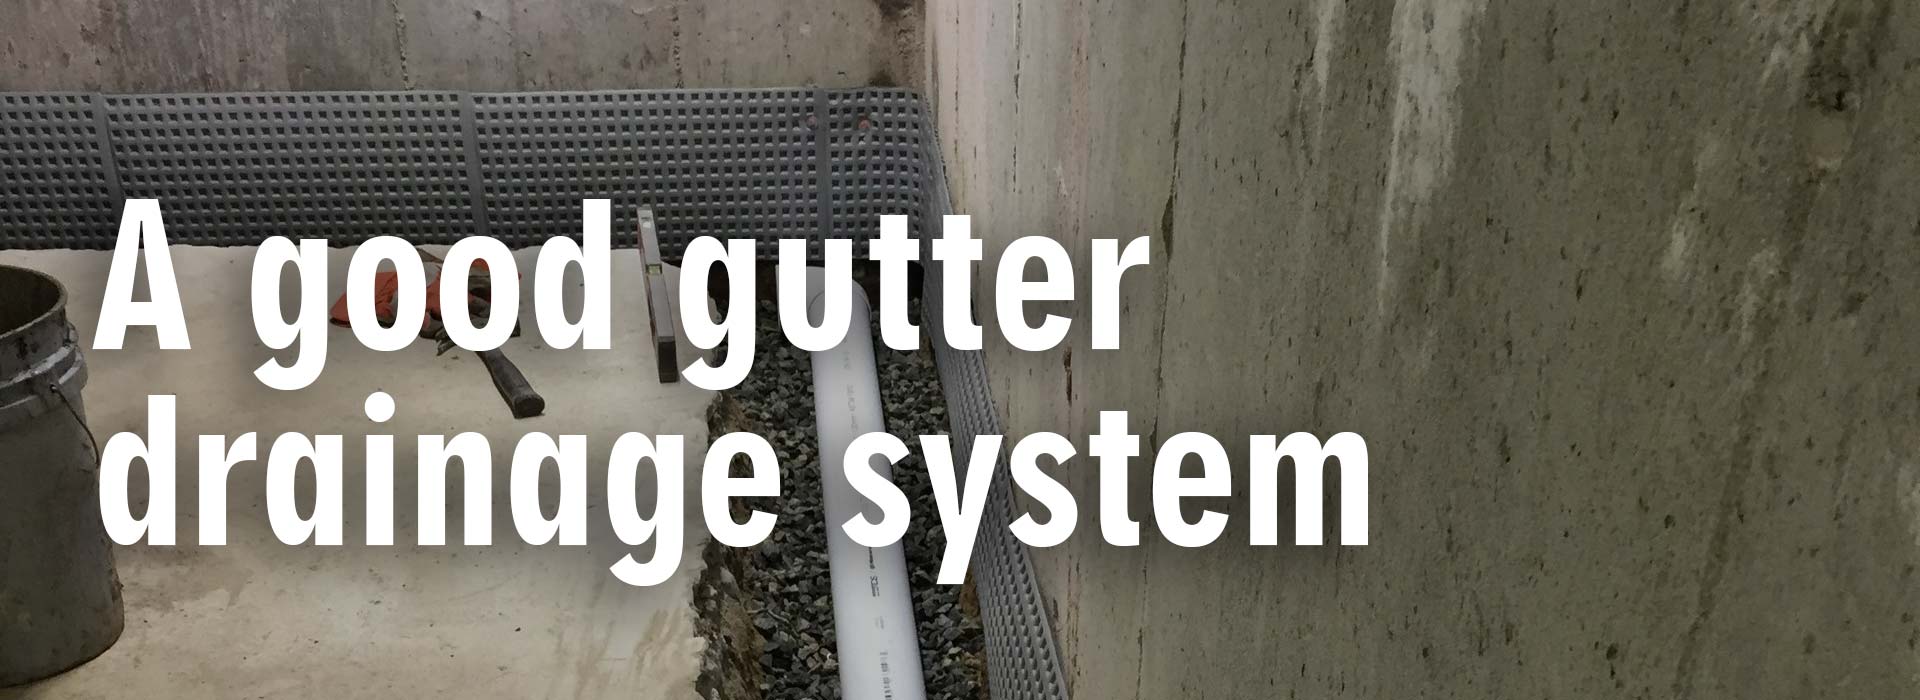 A good gutter drainage system